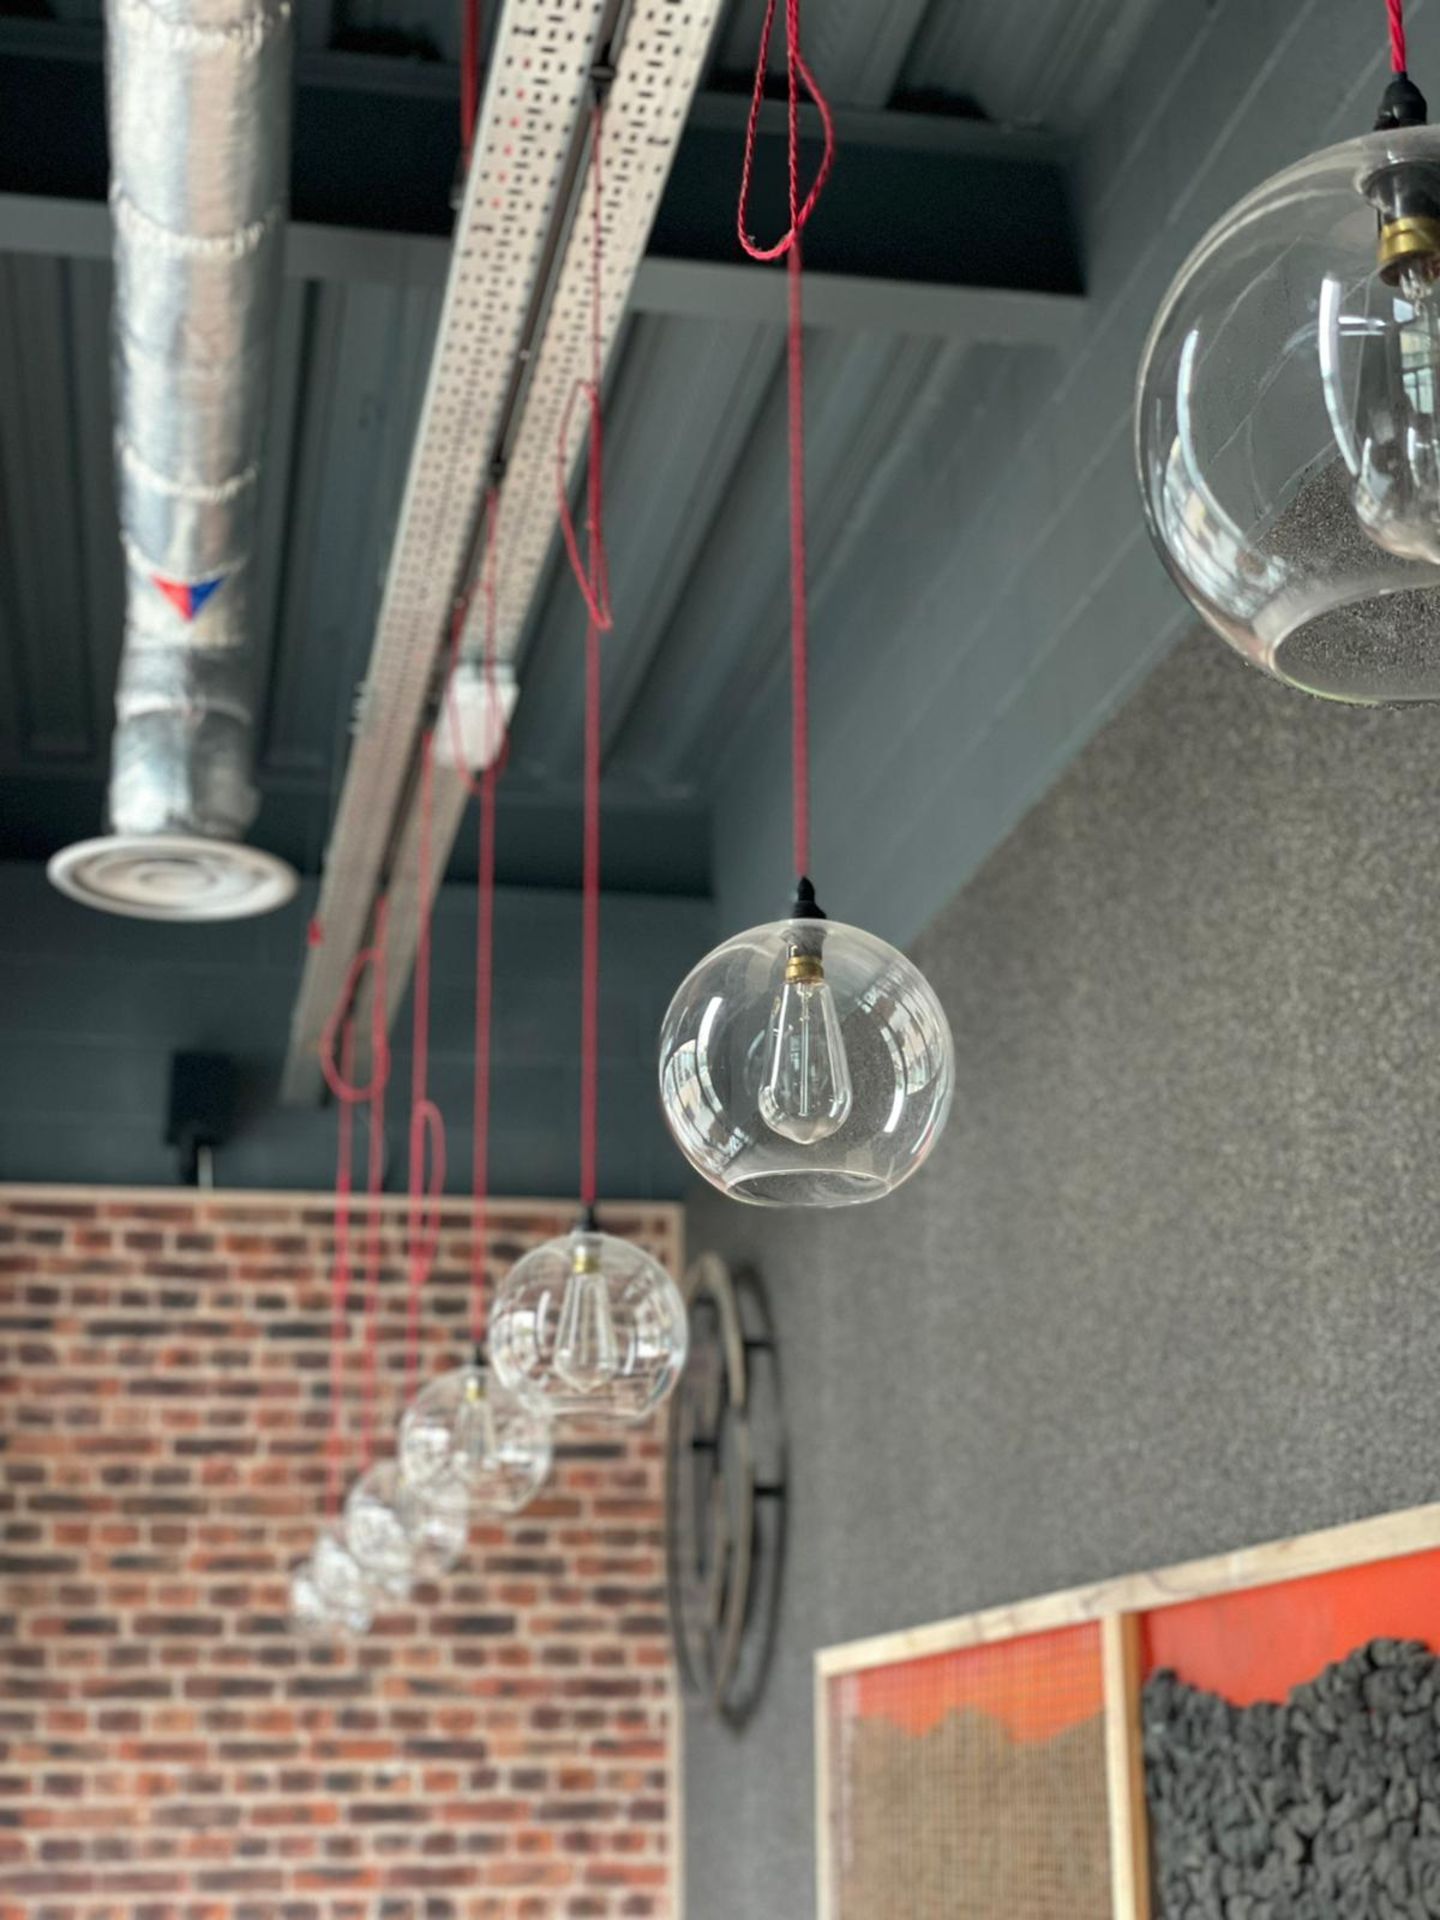 7 x Suspended Ceiling Pendant Lights With Clear Glass Shades - CL674 - Location: Telford, - Image 3 of 3